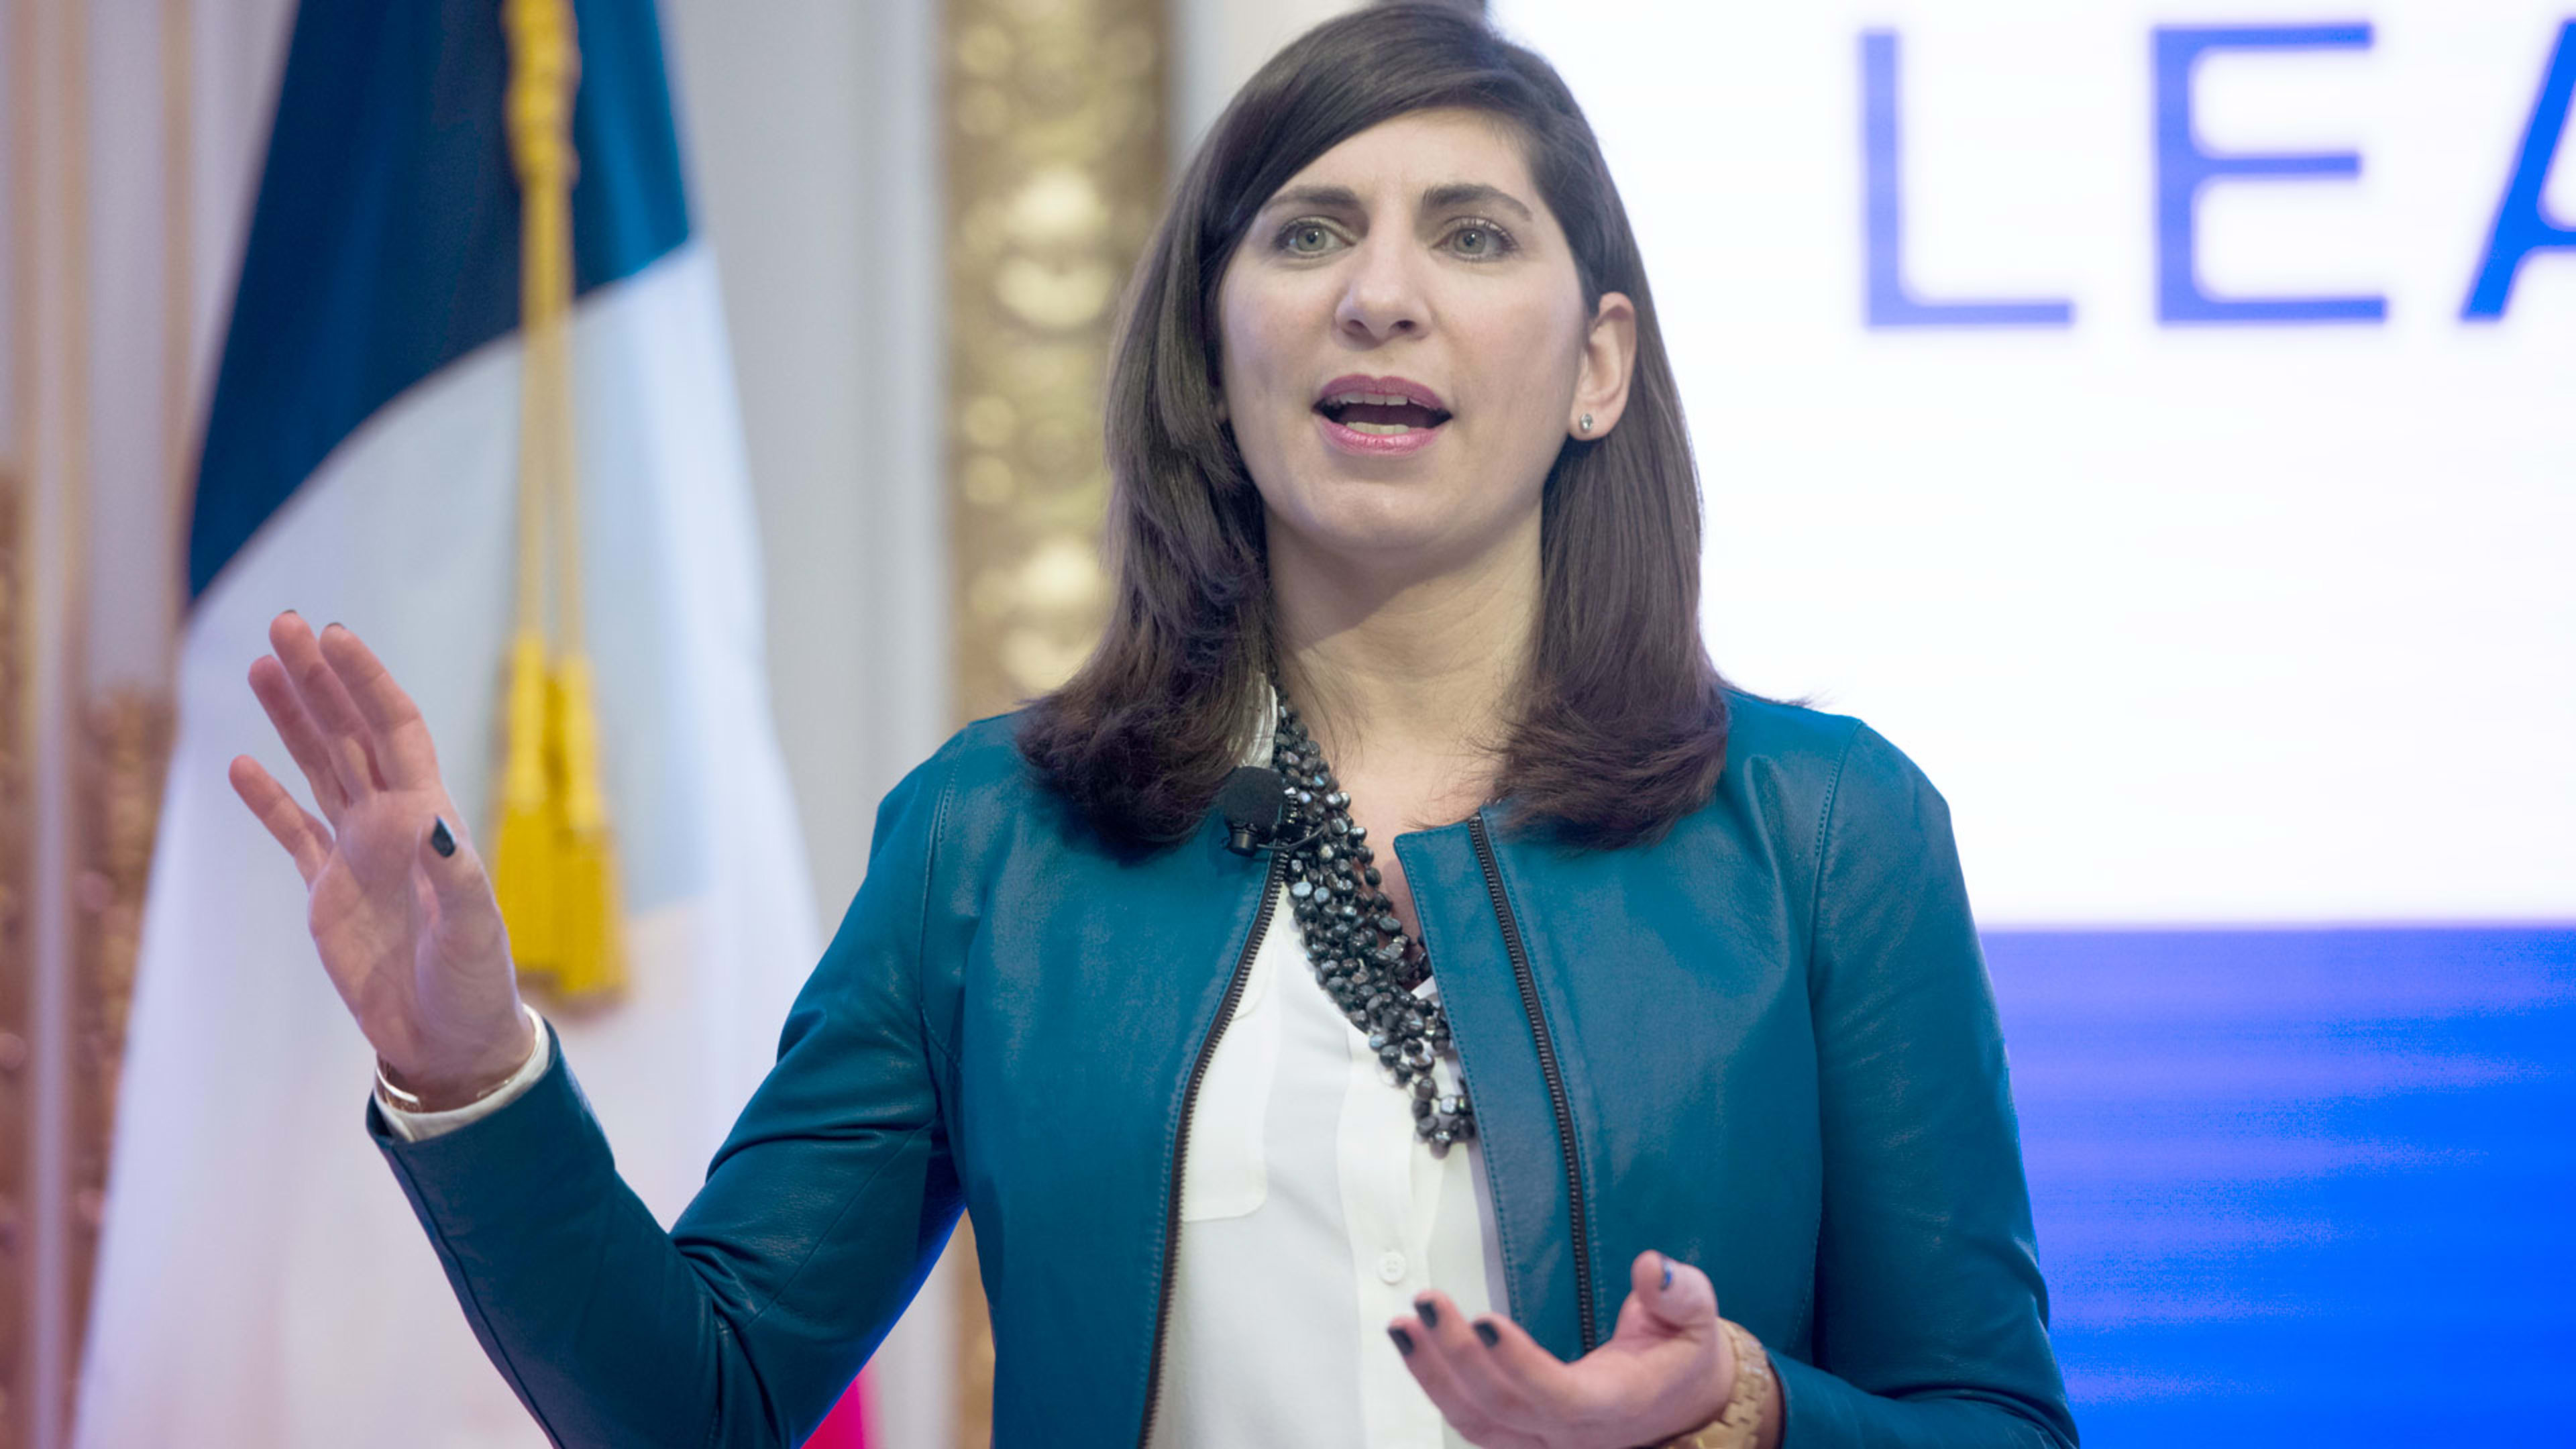 Stacey Cunningham: 4 things to know about the NYSE’s first woman president